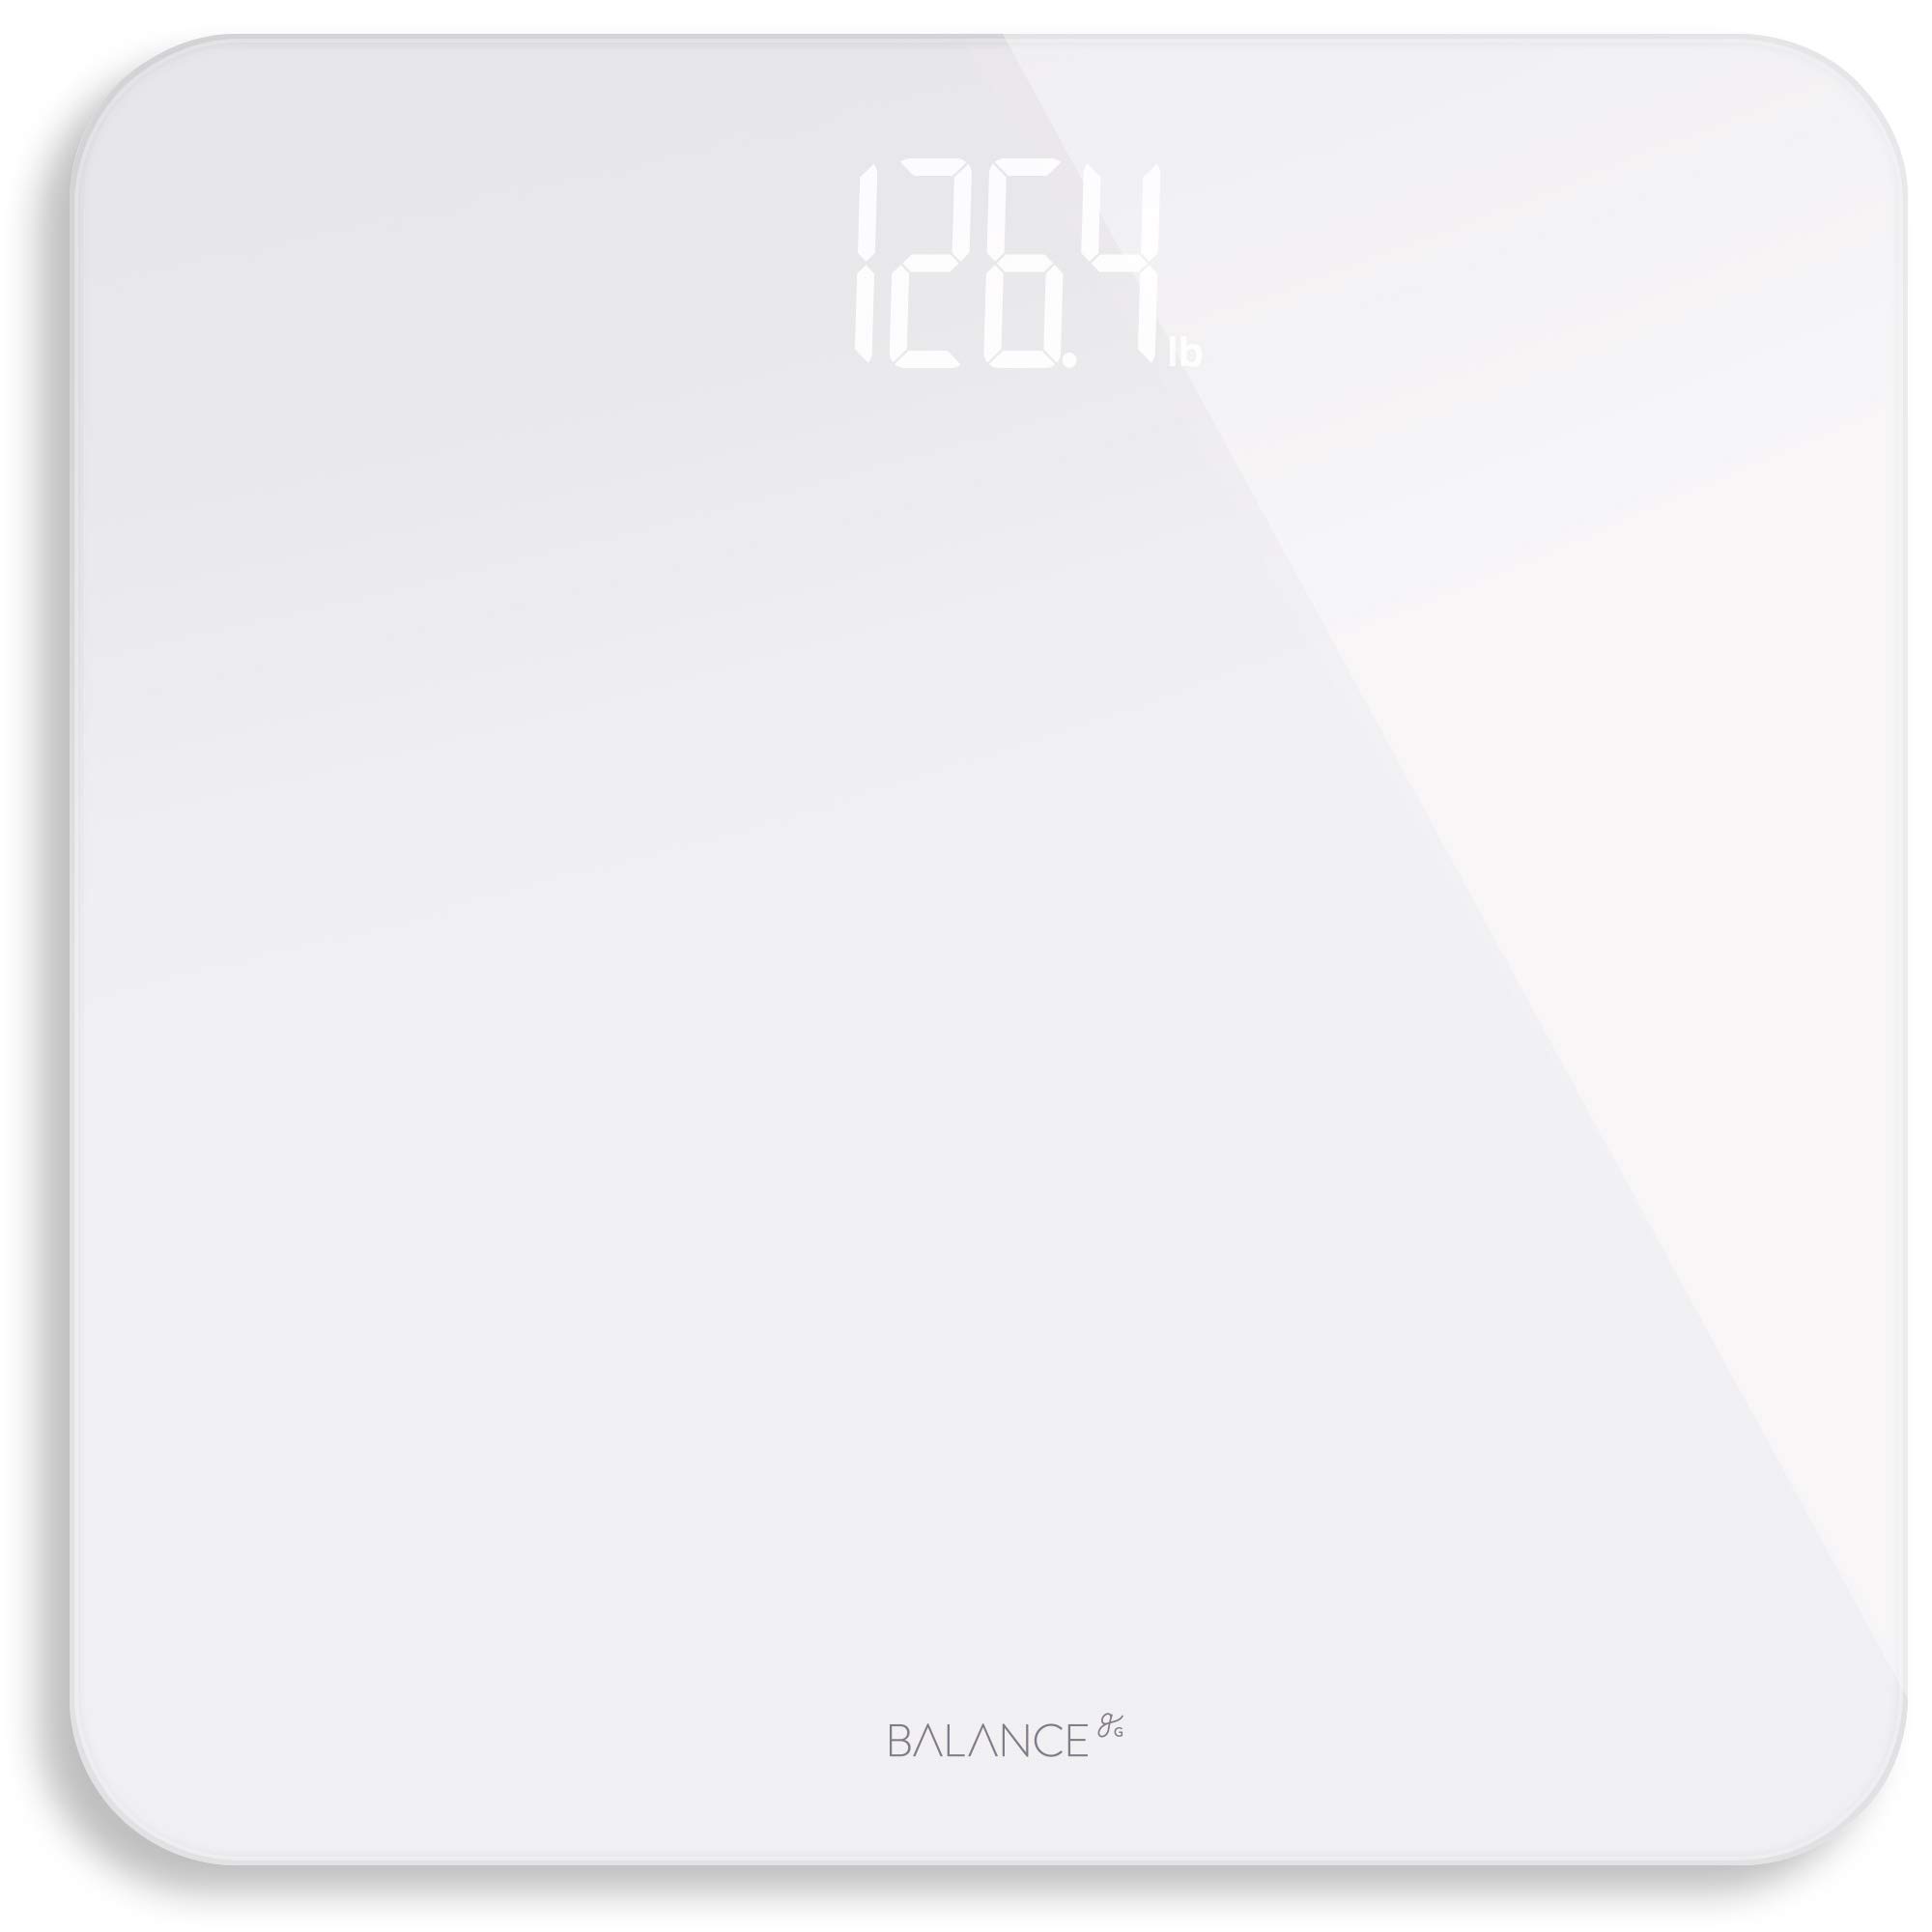 Greater Goods Digital Body Weight Bathroom Scale